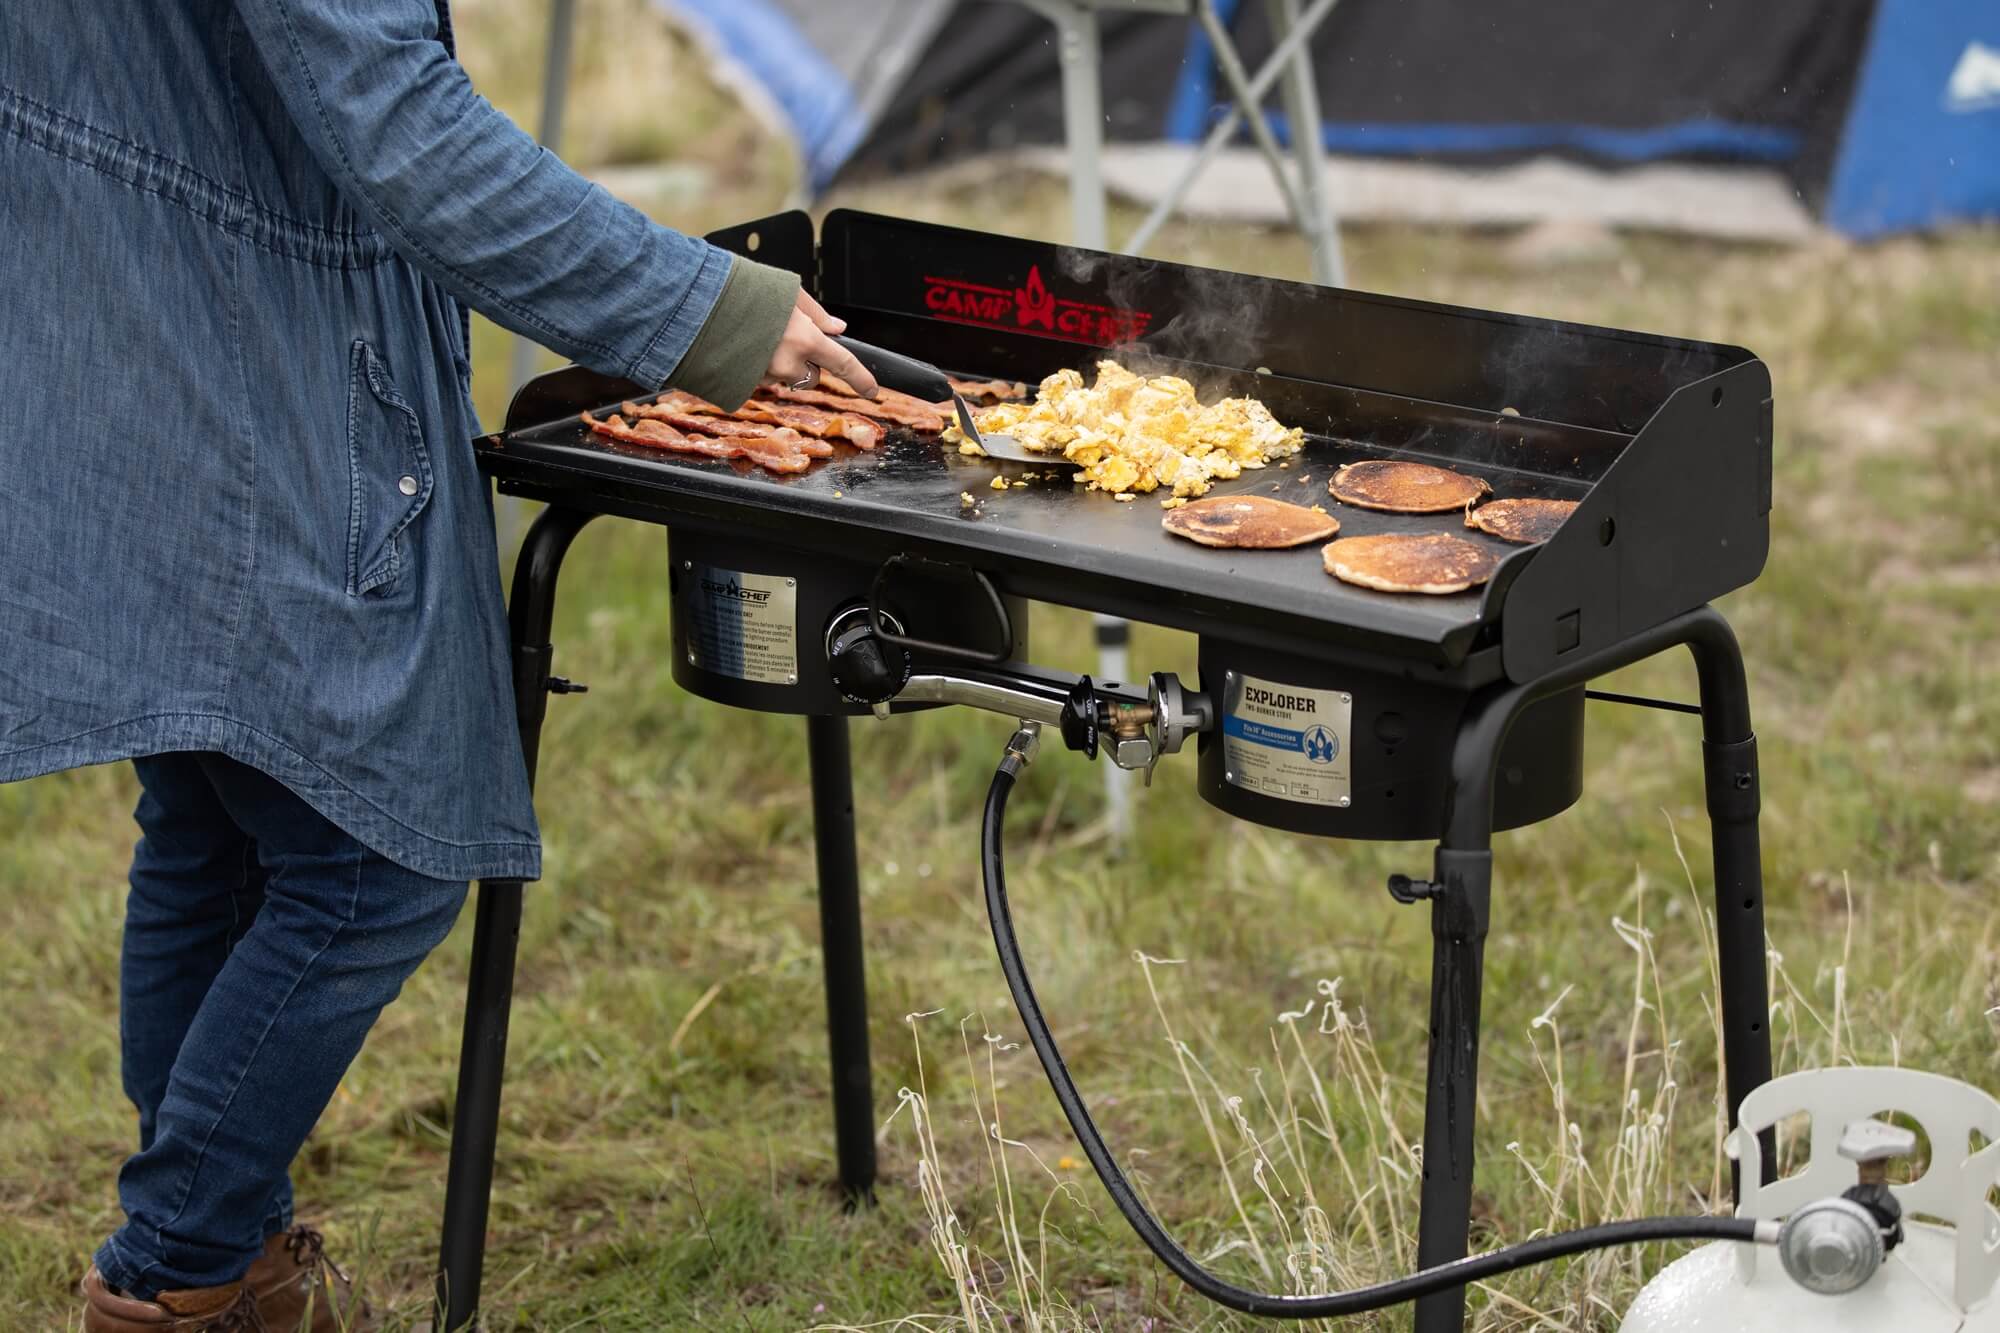 The durable, versatile Camp Chef Explorer Two-Burner cooking system packs enough power in its 30,000 BTU burners to boil water and cook your food in a hurry. Portability is no problem with the removable legs, and a three-sided windscreen makes outdoor cooking easy. Being one of Camp Chef's 14" cooking systems, the Explorer is very versatile and can be equipped with many different Camp Chef accessories, from the Professional Grill Box to the Italia Artisan Pizza Oven.